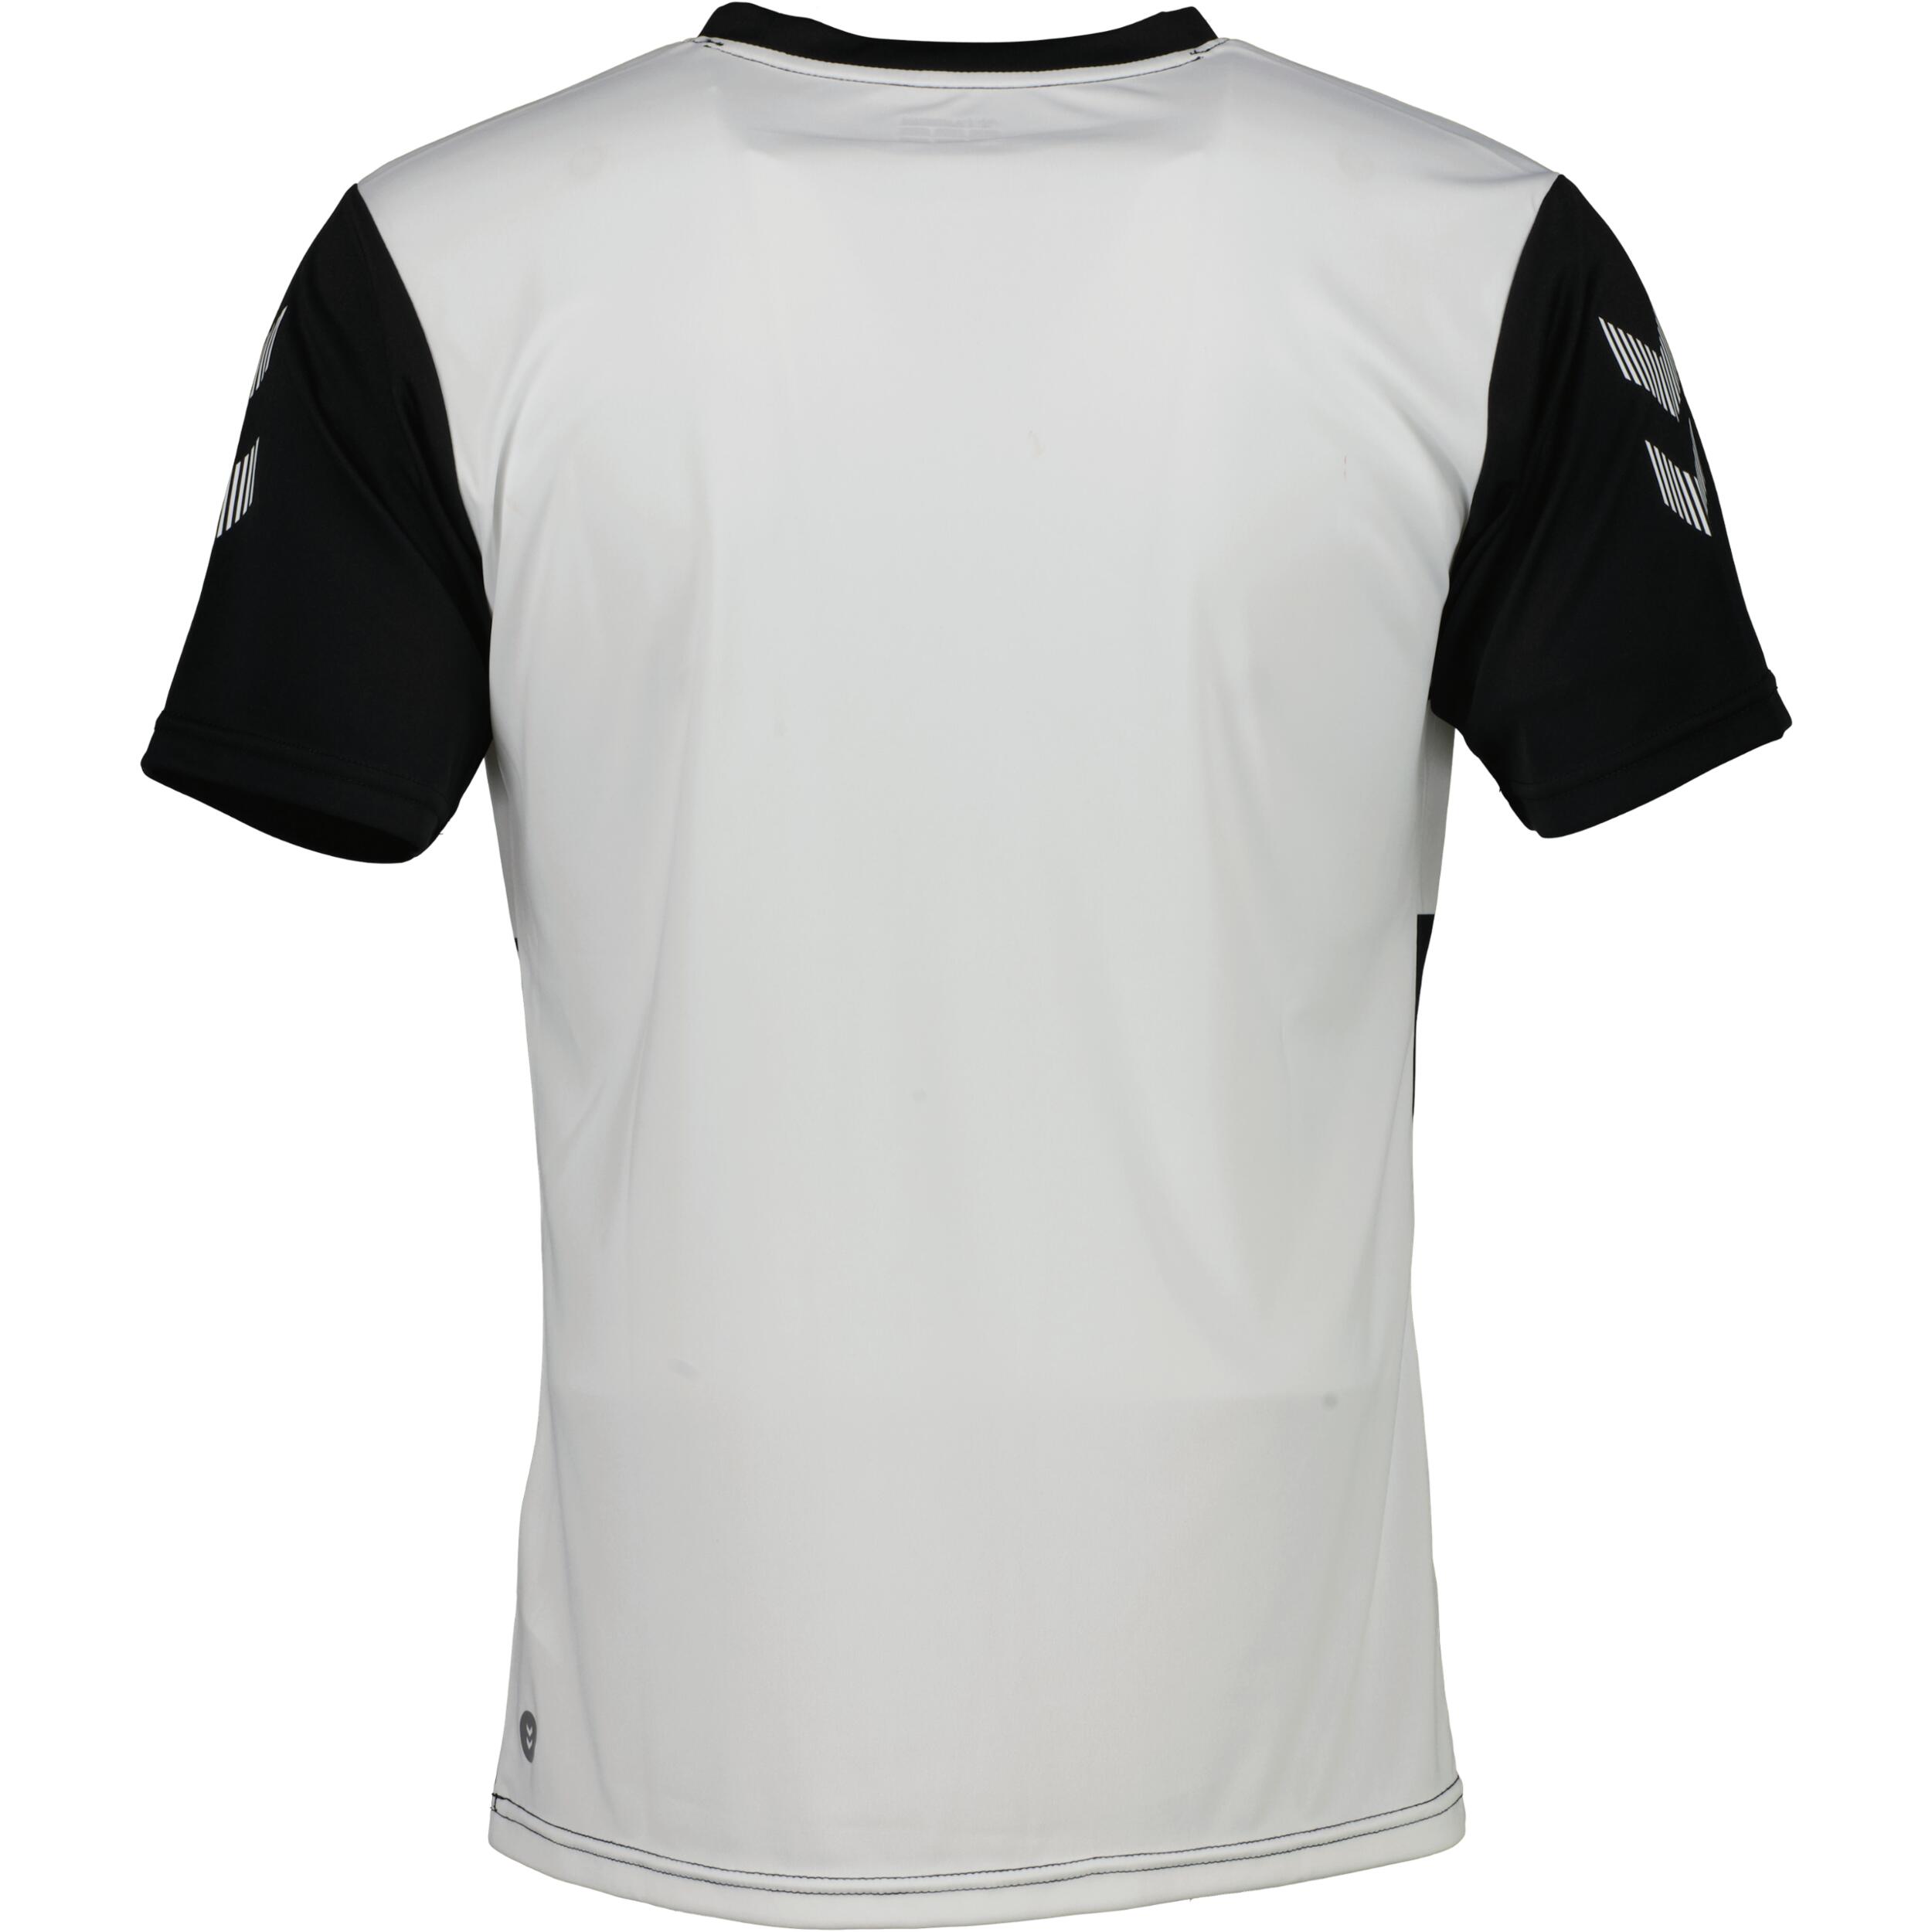 Hoop jersey for men, great for football, in black 2/3